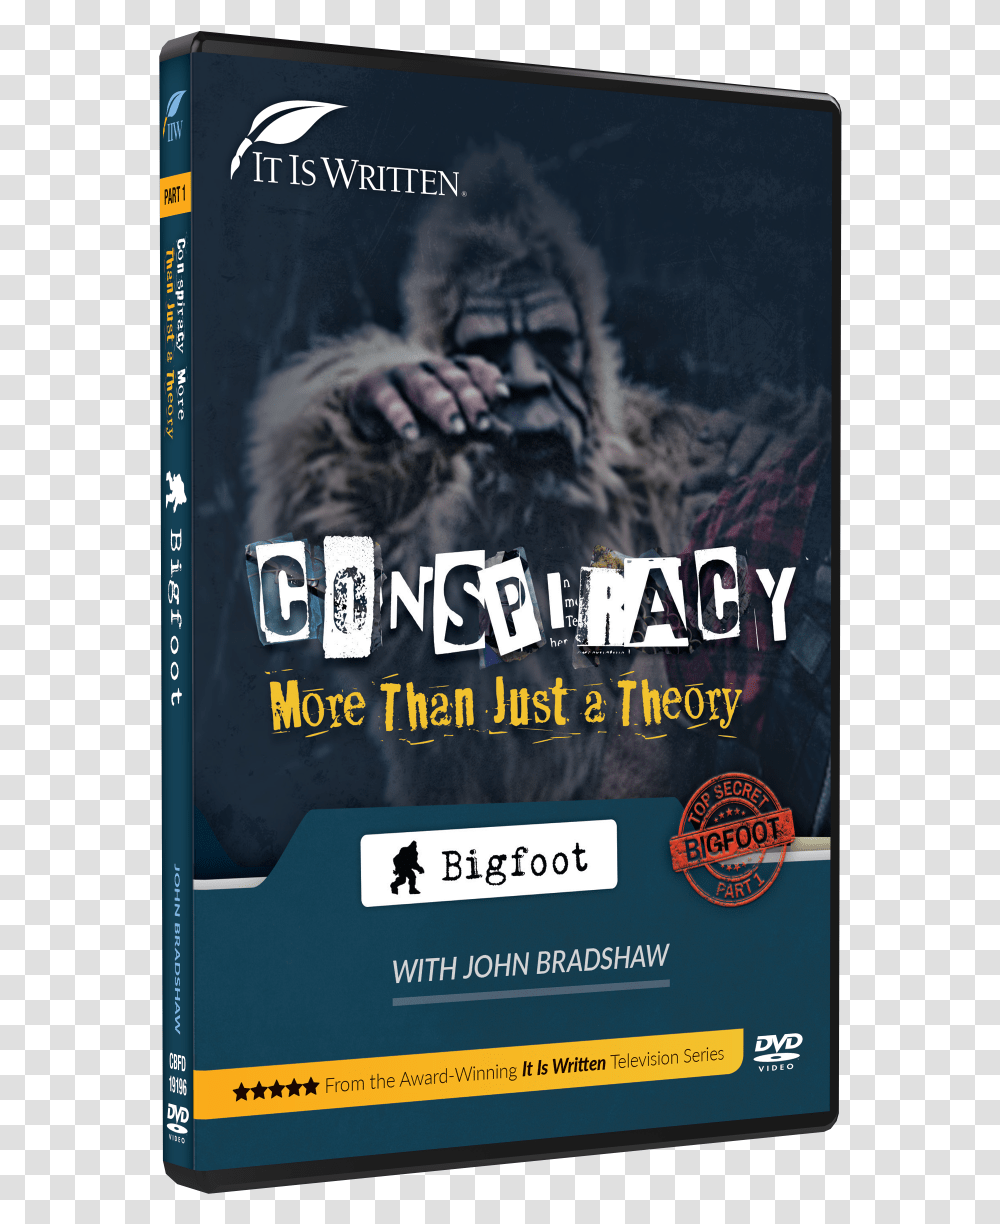 Bigfoot Dvd Conspiracy More Than Just A Theory Bigfoot, Poster, Advertisement, Word, Flyer Transparent Png